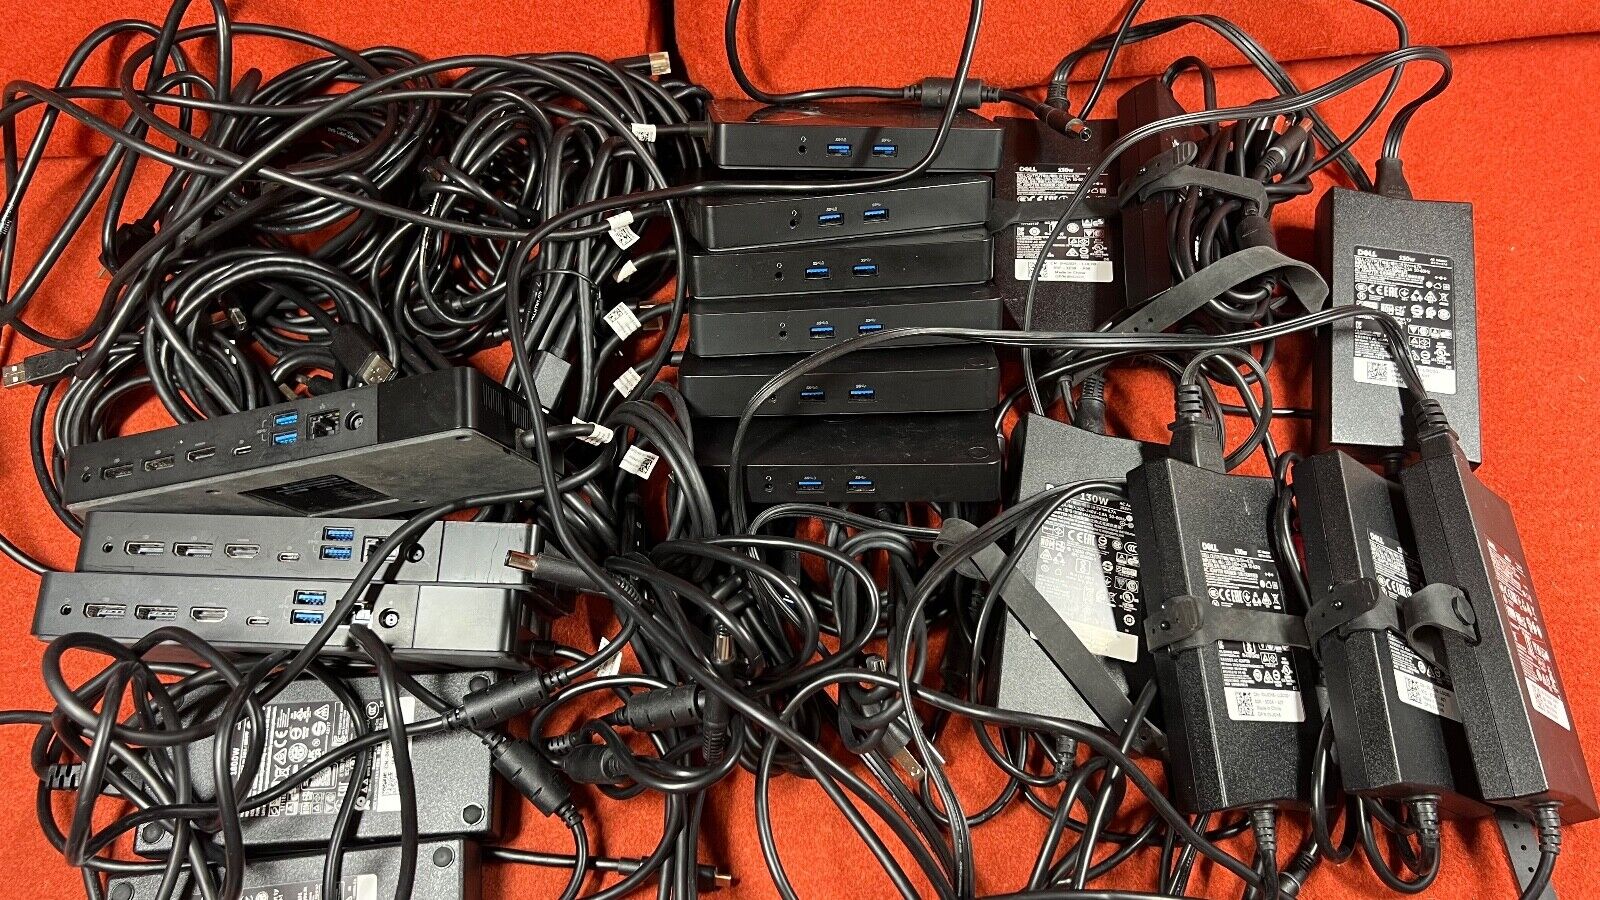 LOT DELL Laptop Dock USB-C 4K 6xK17A 3xWD19 6x130W 2x180w Power DP cable WORKING